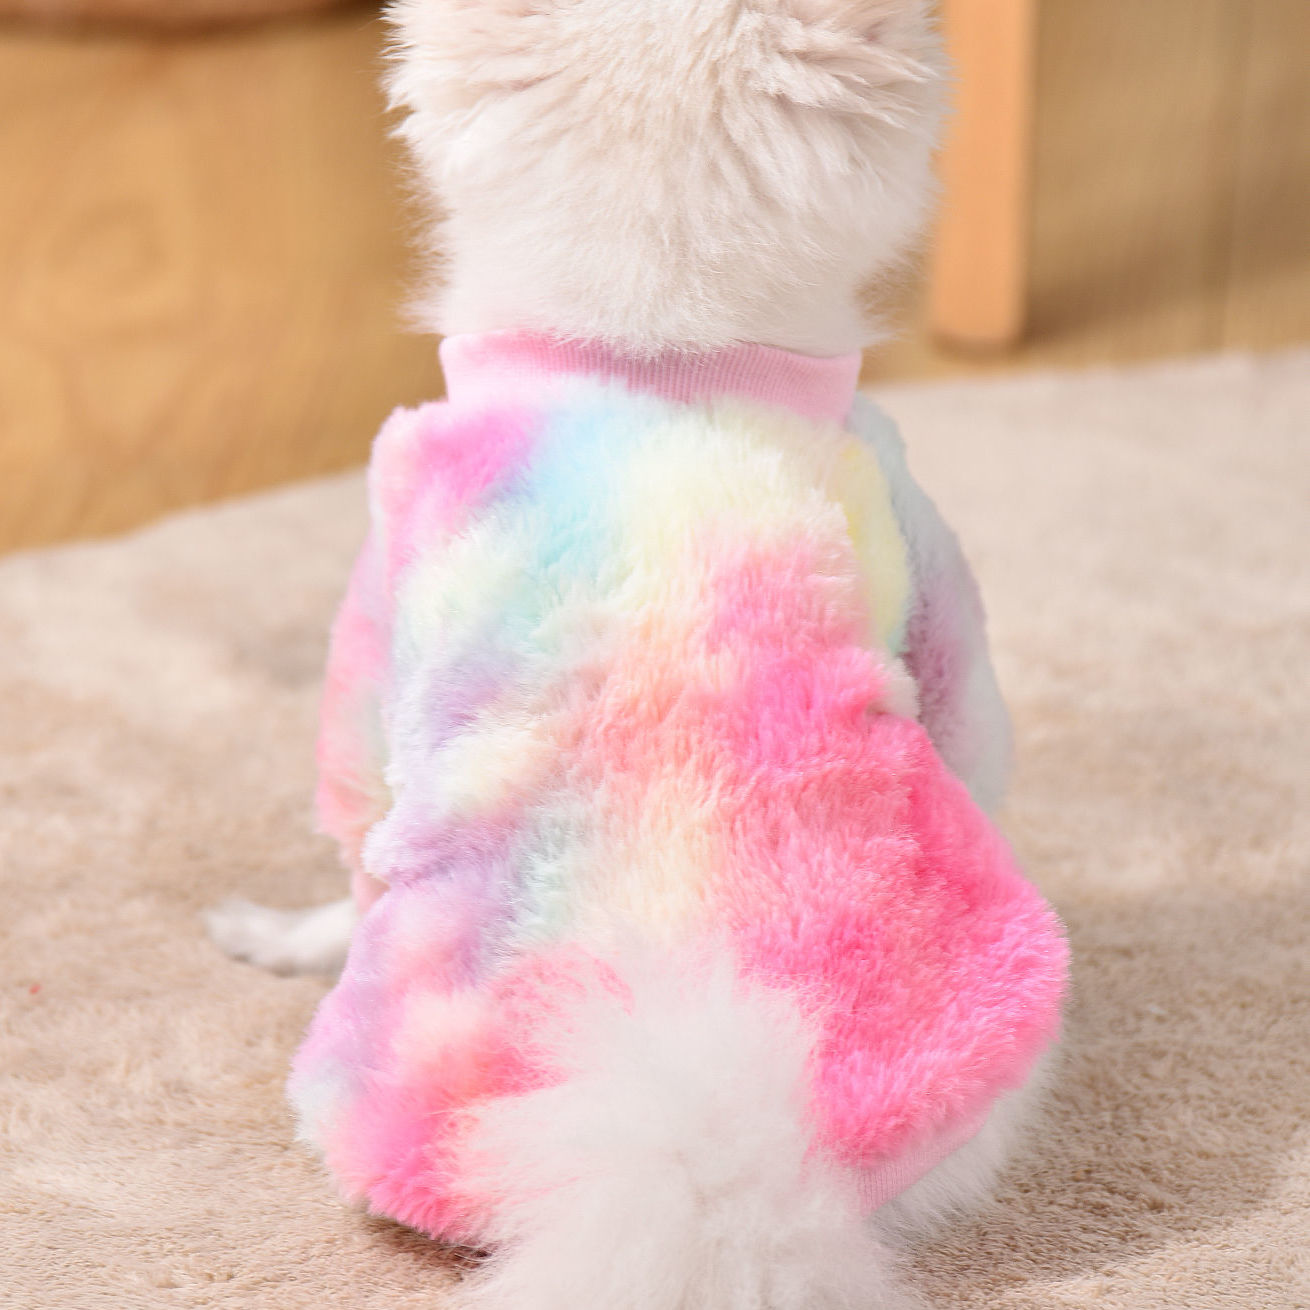 Keep Your Small Dog Cozy and Stylish with This Fleece Sweater Pet Outfit!